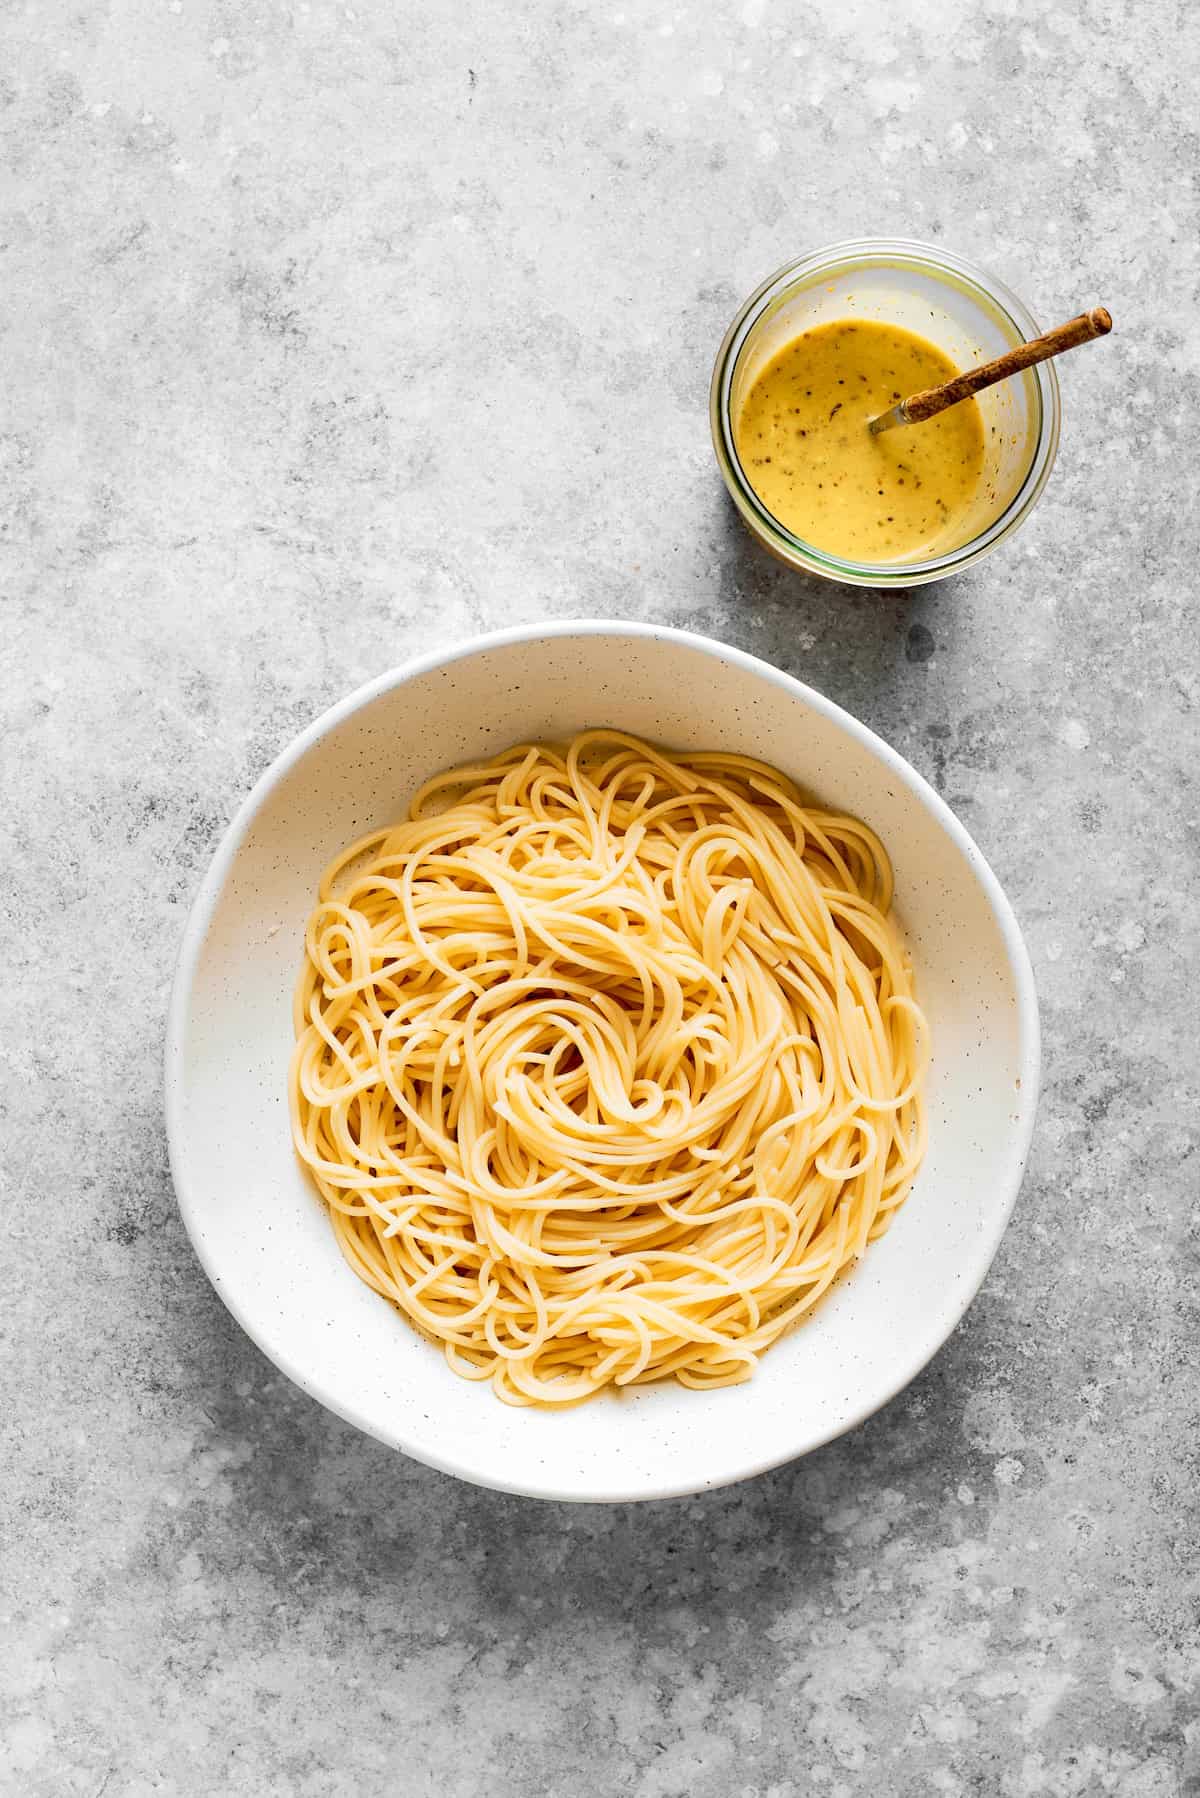 The spaghetti is placed in a bowl with the dressing next to it.